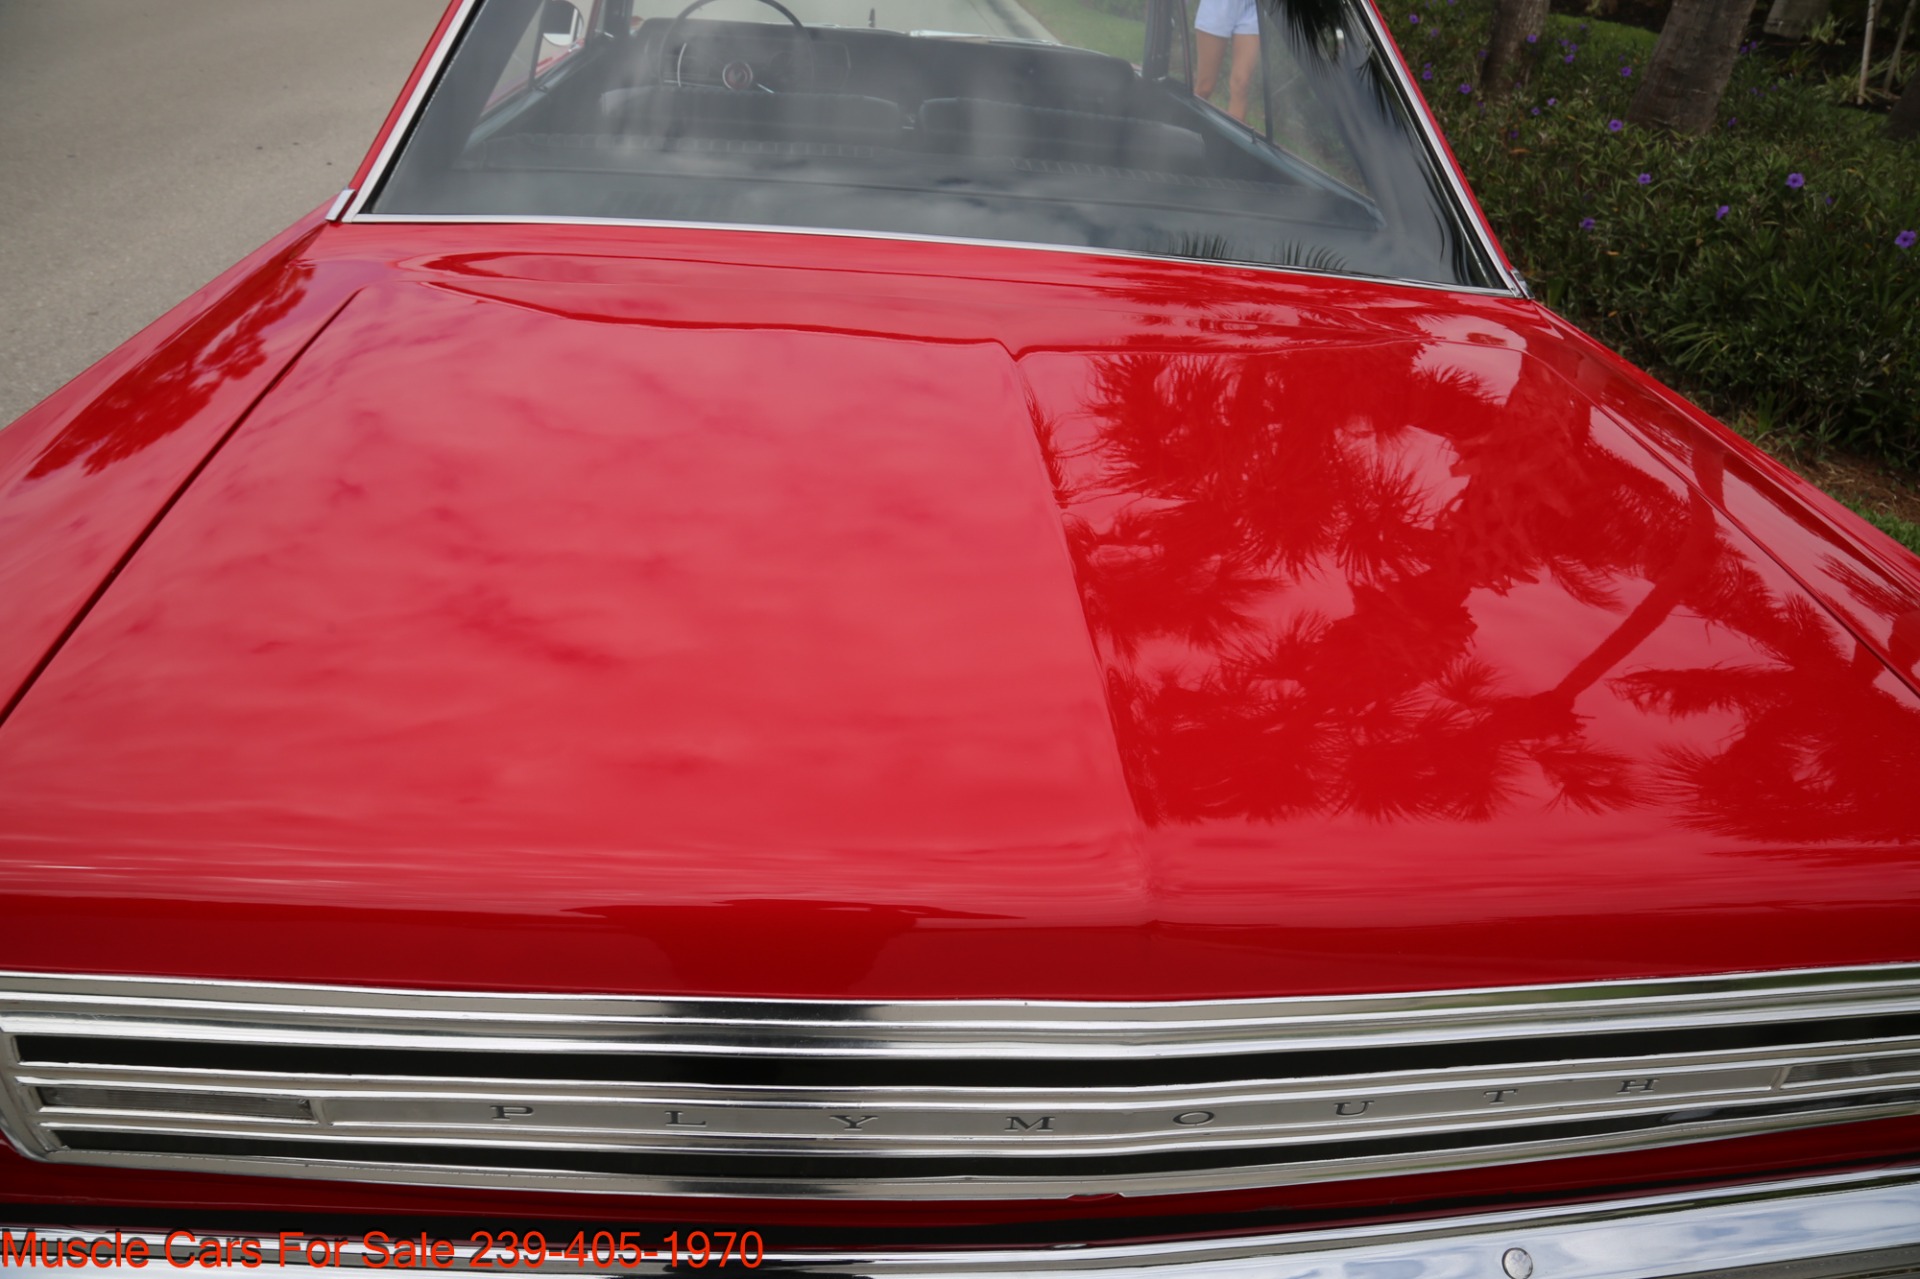 Used 1966 Plymouth Belvedere 383 4 speed Manual for sale Sold at Muscle Cars for Sale Inc. in Fort Myers FL 33912 8